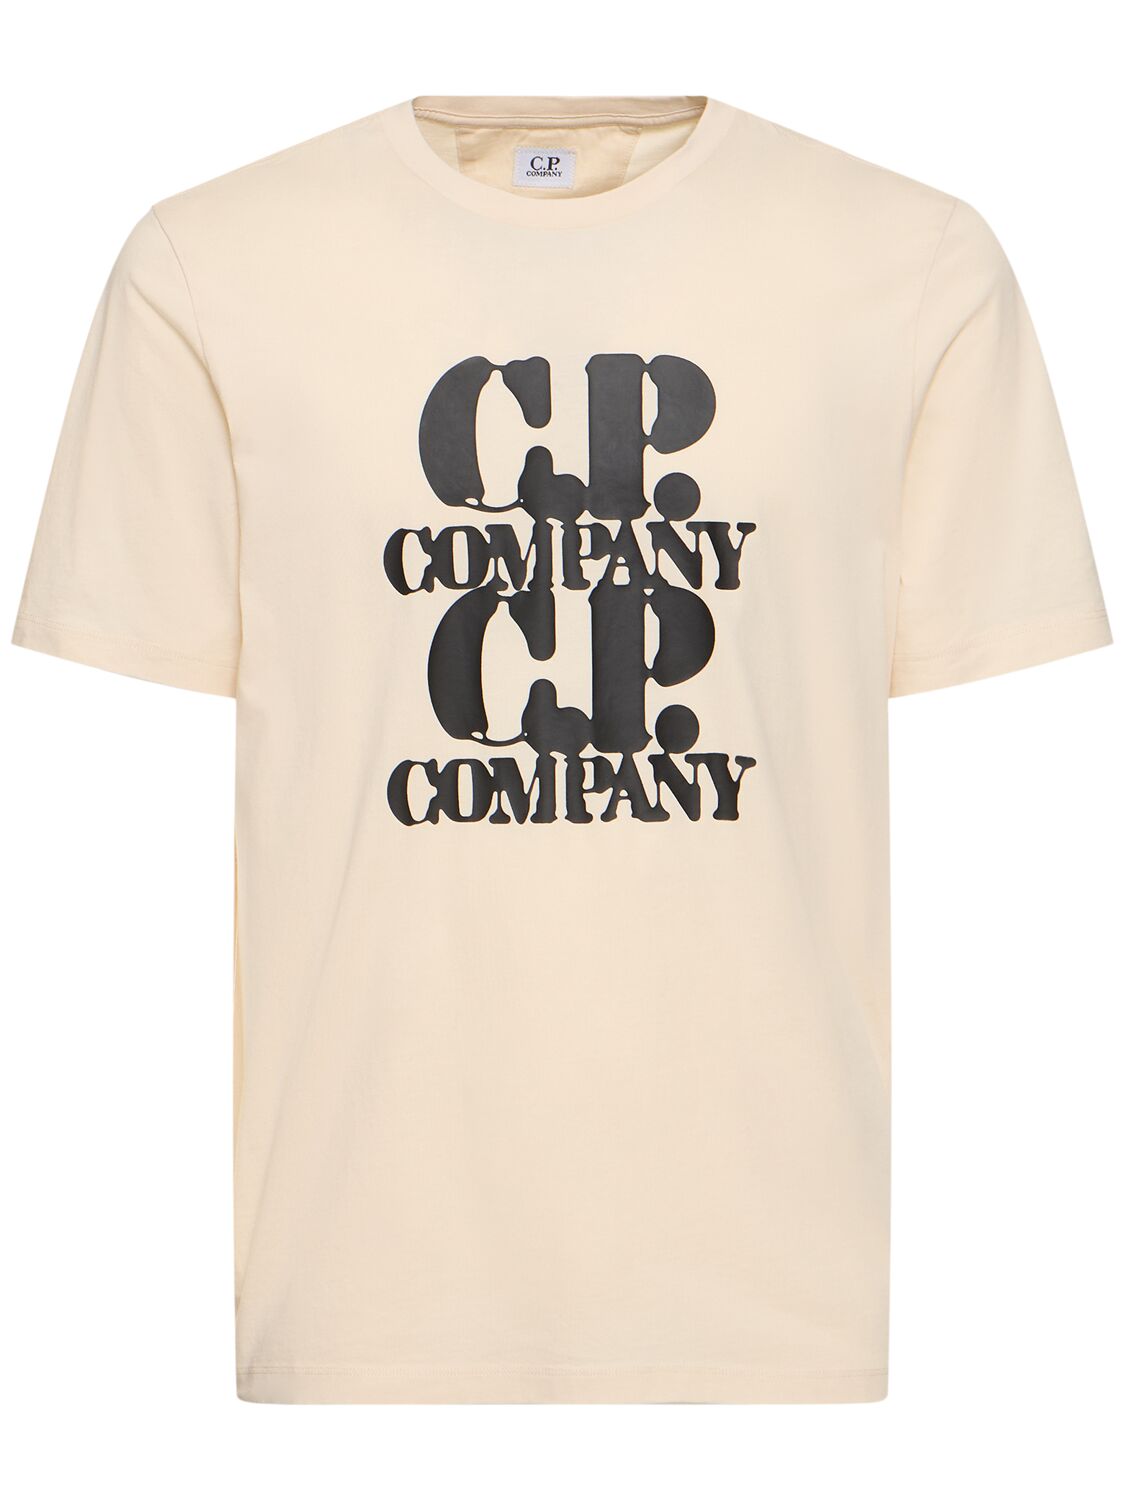 C.p. Company Graphic T-shirt In Neutral